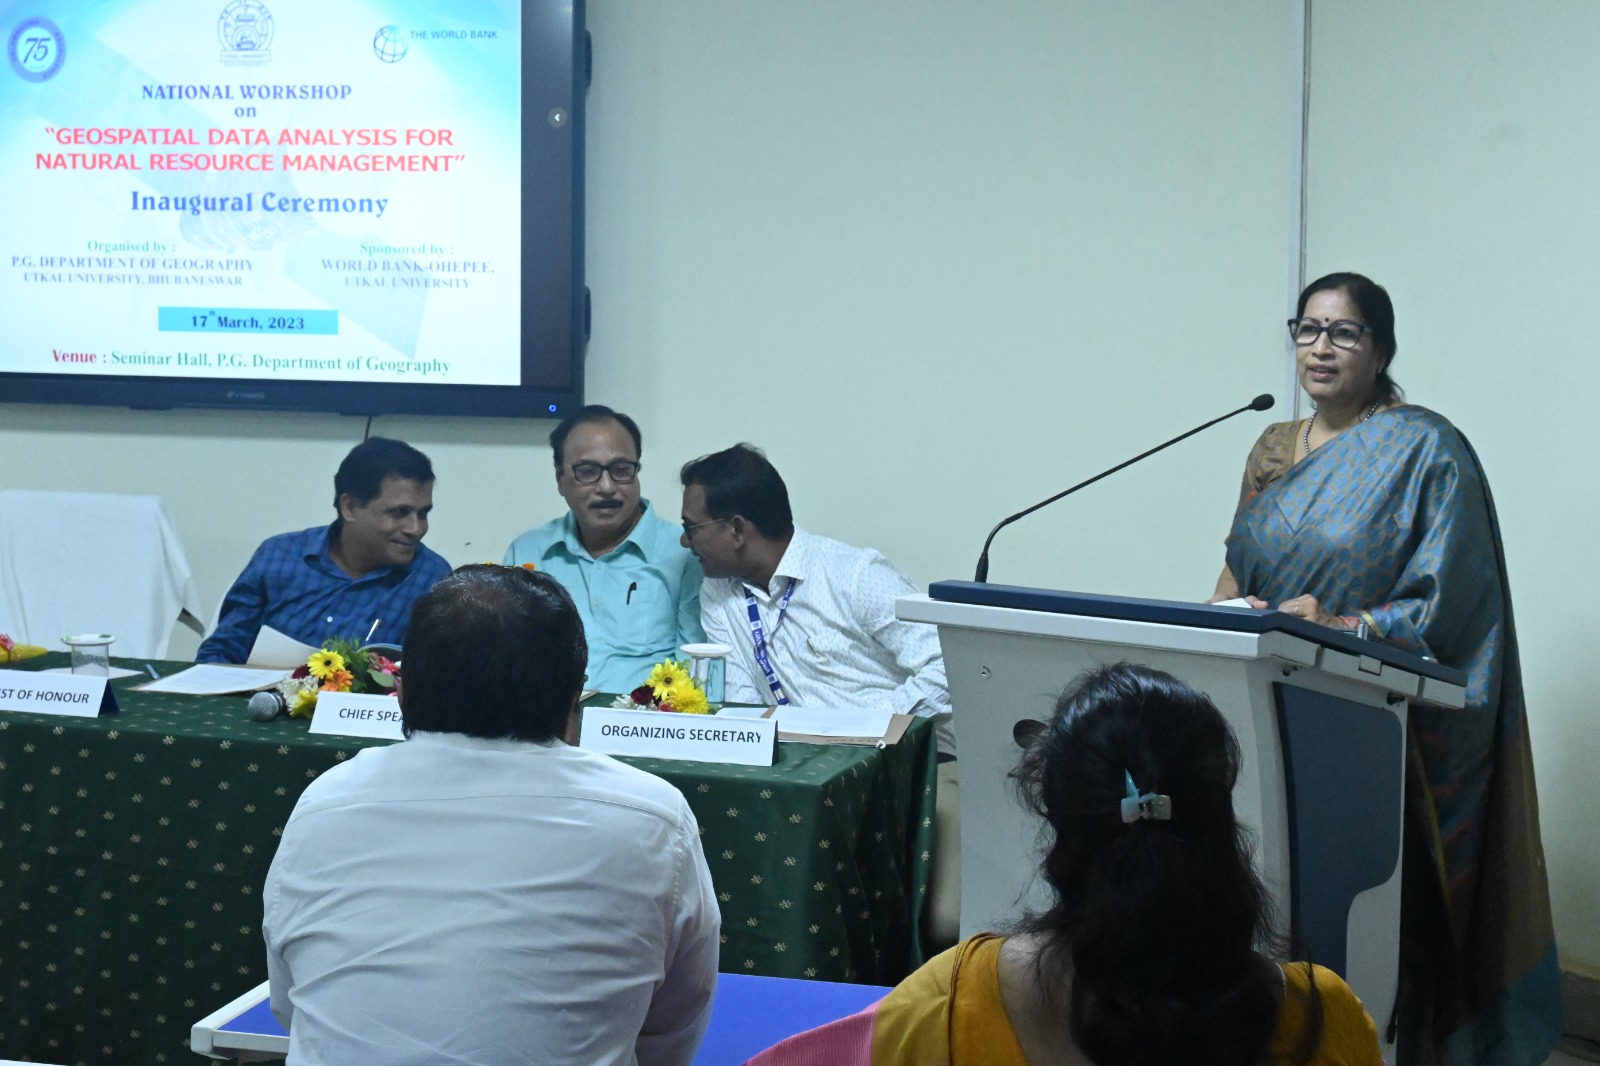 You are currently viewing “National Workshop on Geospatial Data Analysis for Natural Resource Management” inaugurated at Utkal University”